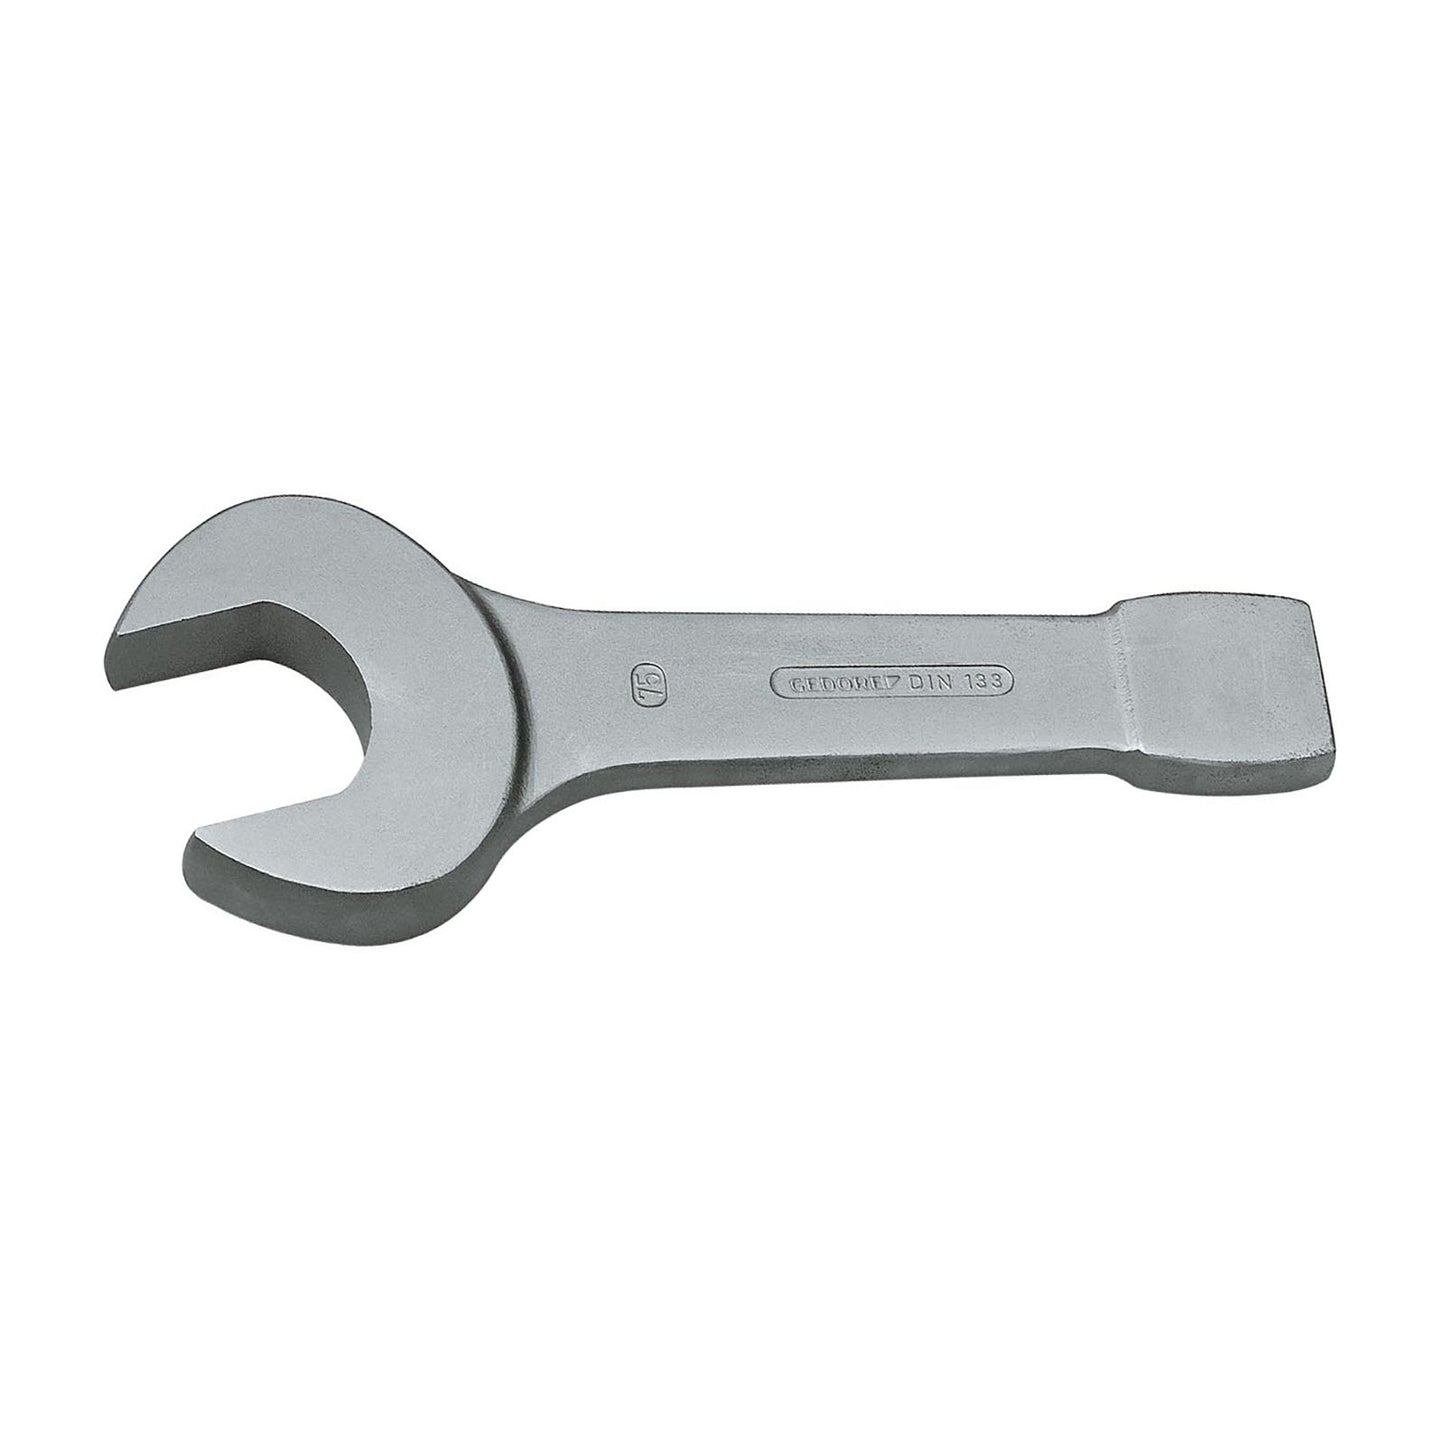 GEDORE 133 34 - Open Strike Wrench, 34mm (6411030)